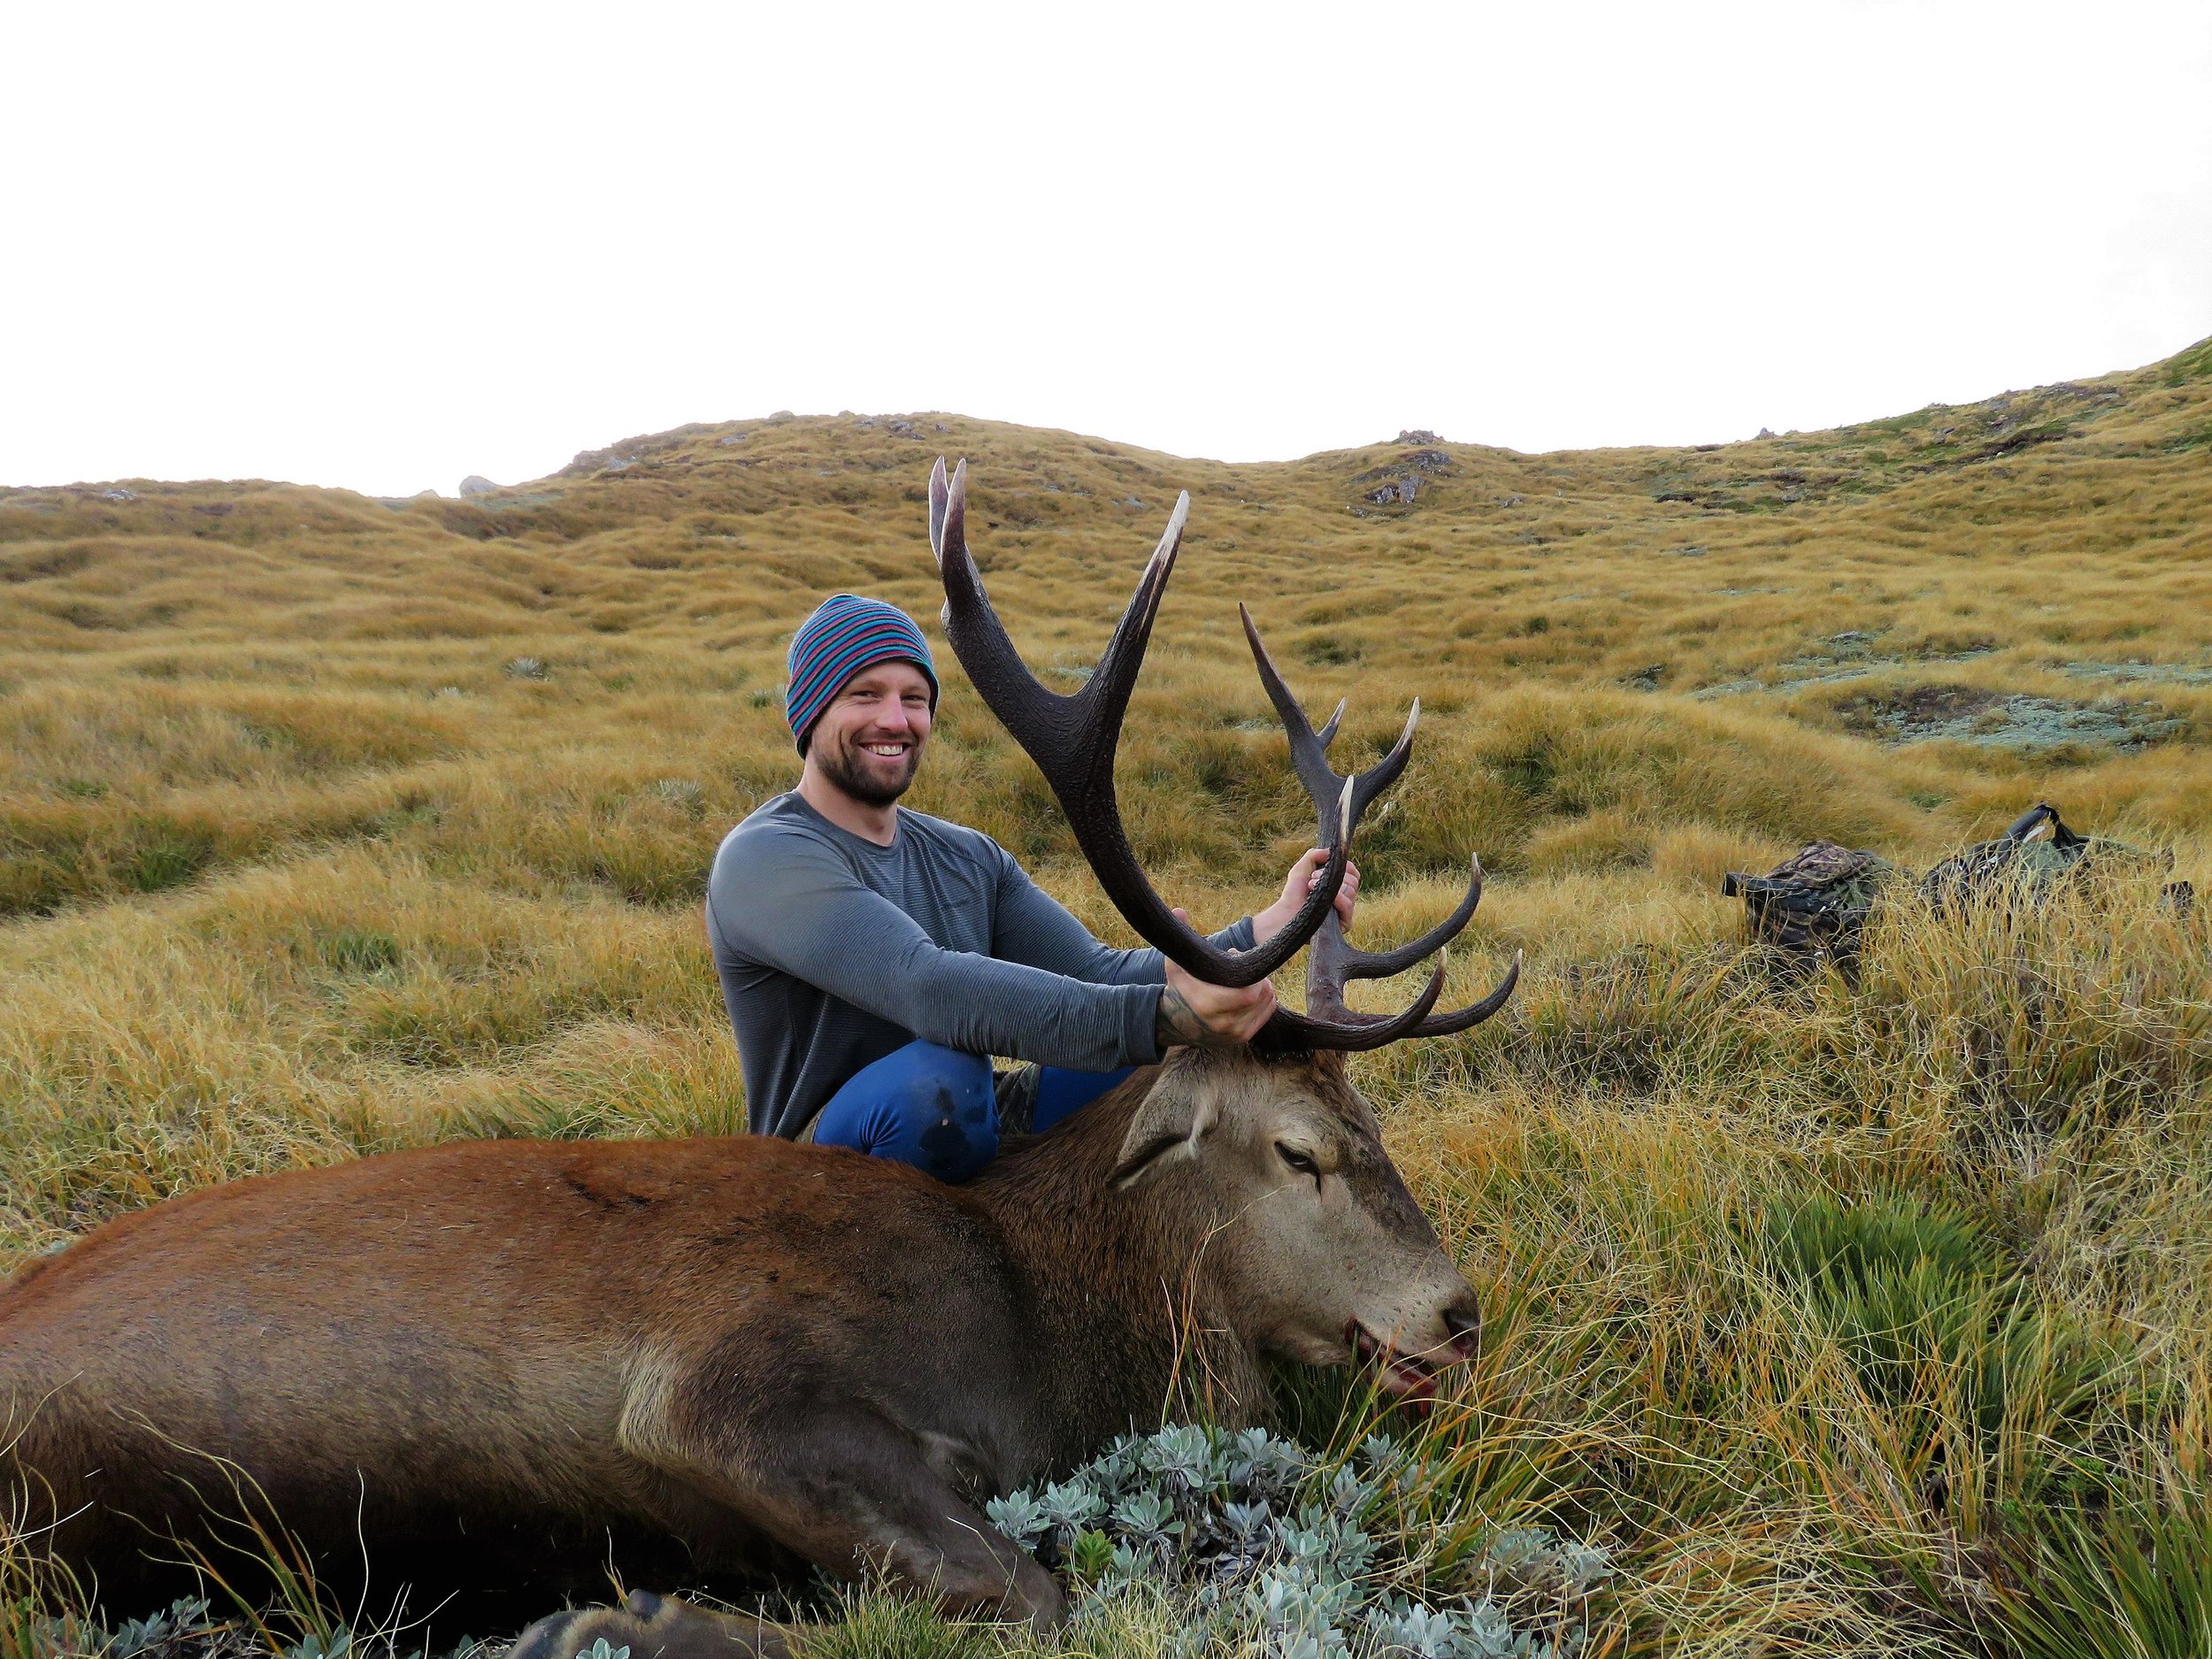  Dream result with a great new zealand high country stag